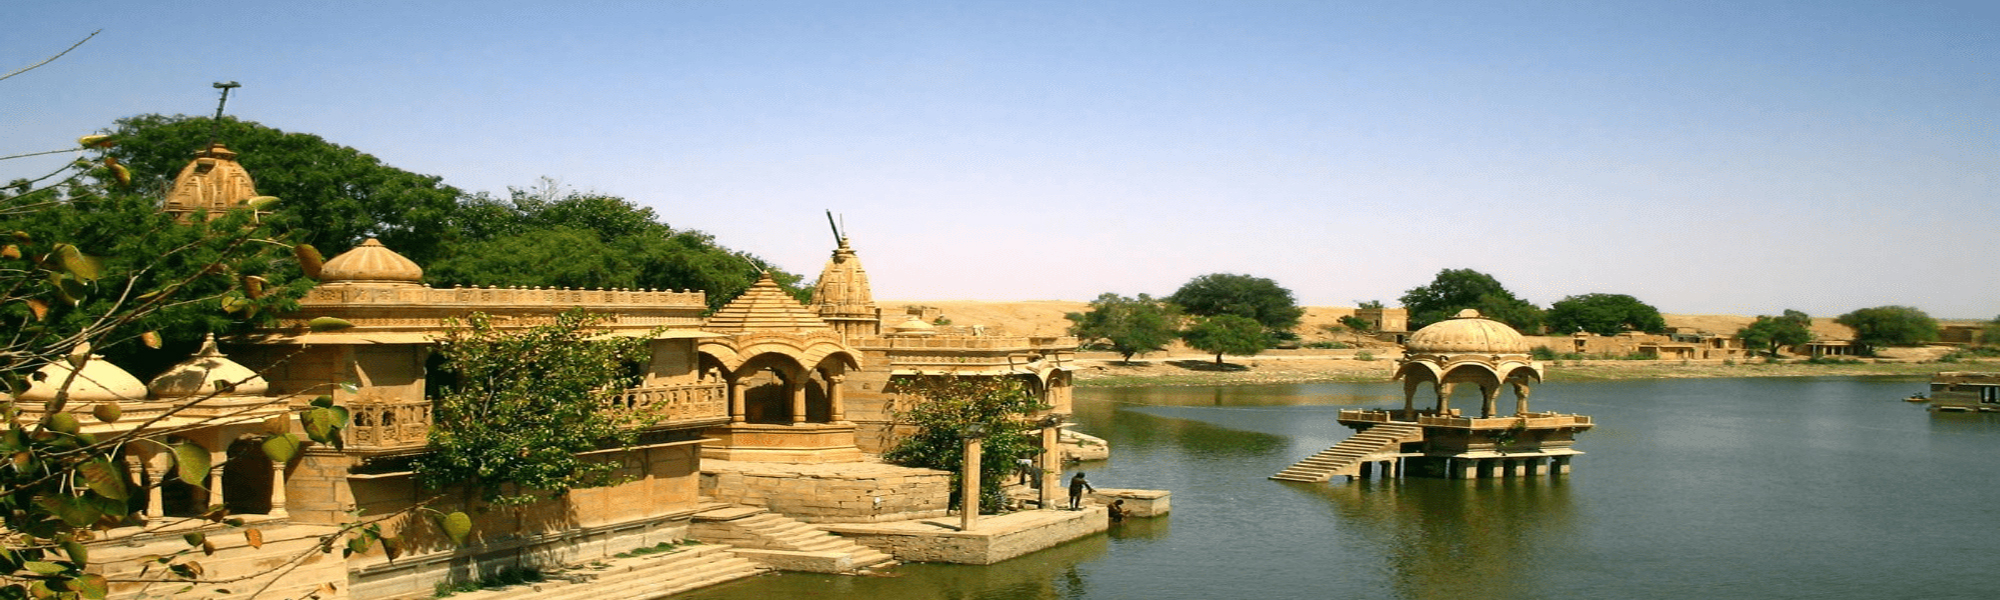 Heritage Budget Tours in India 